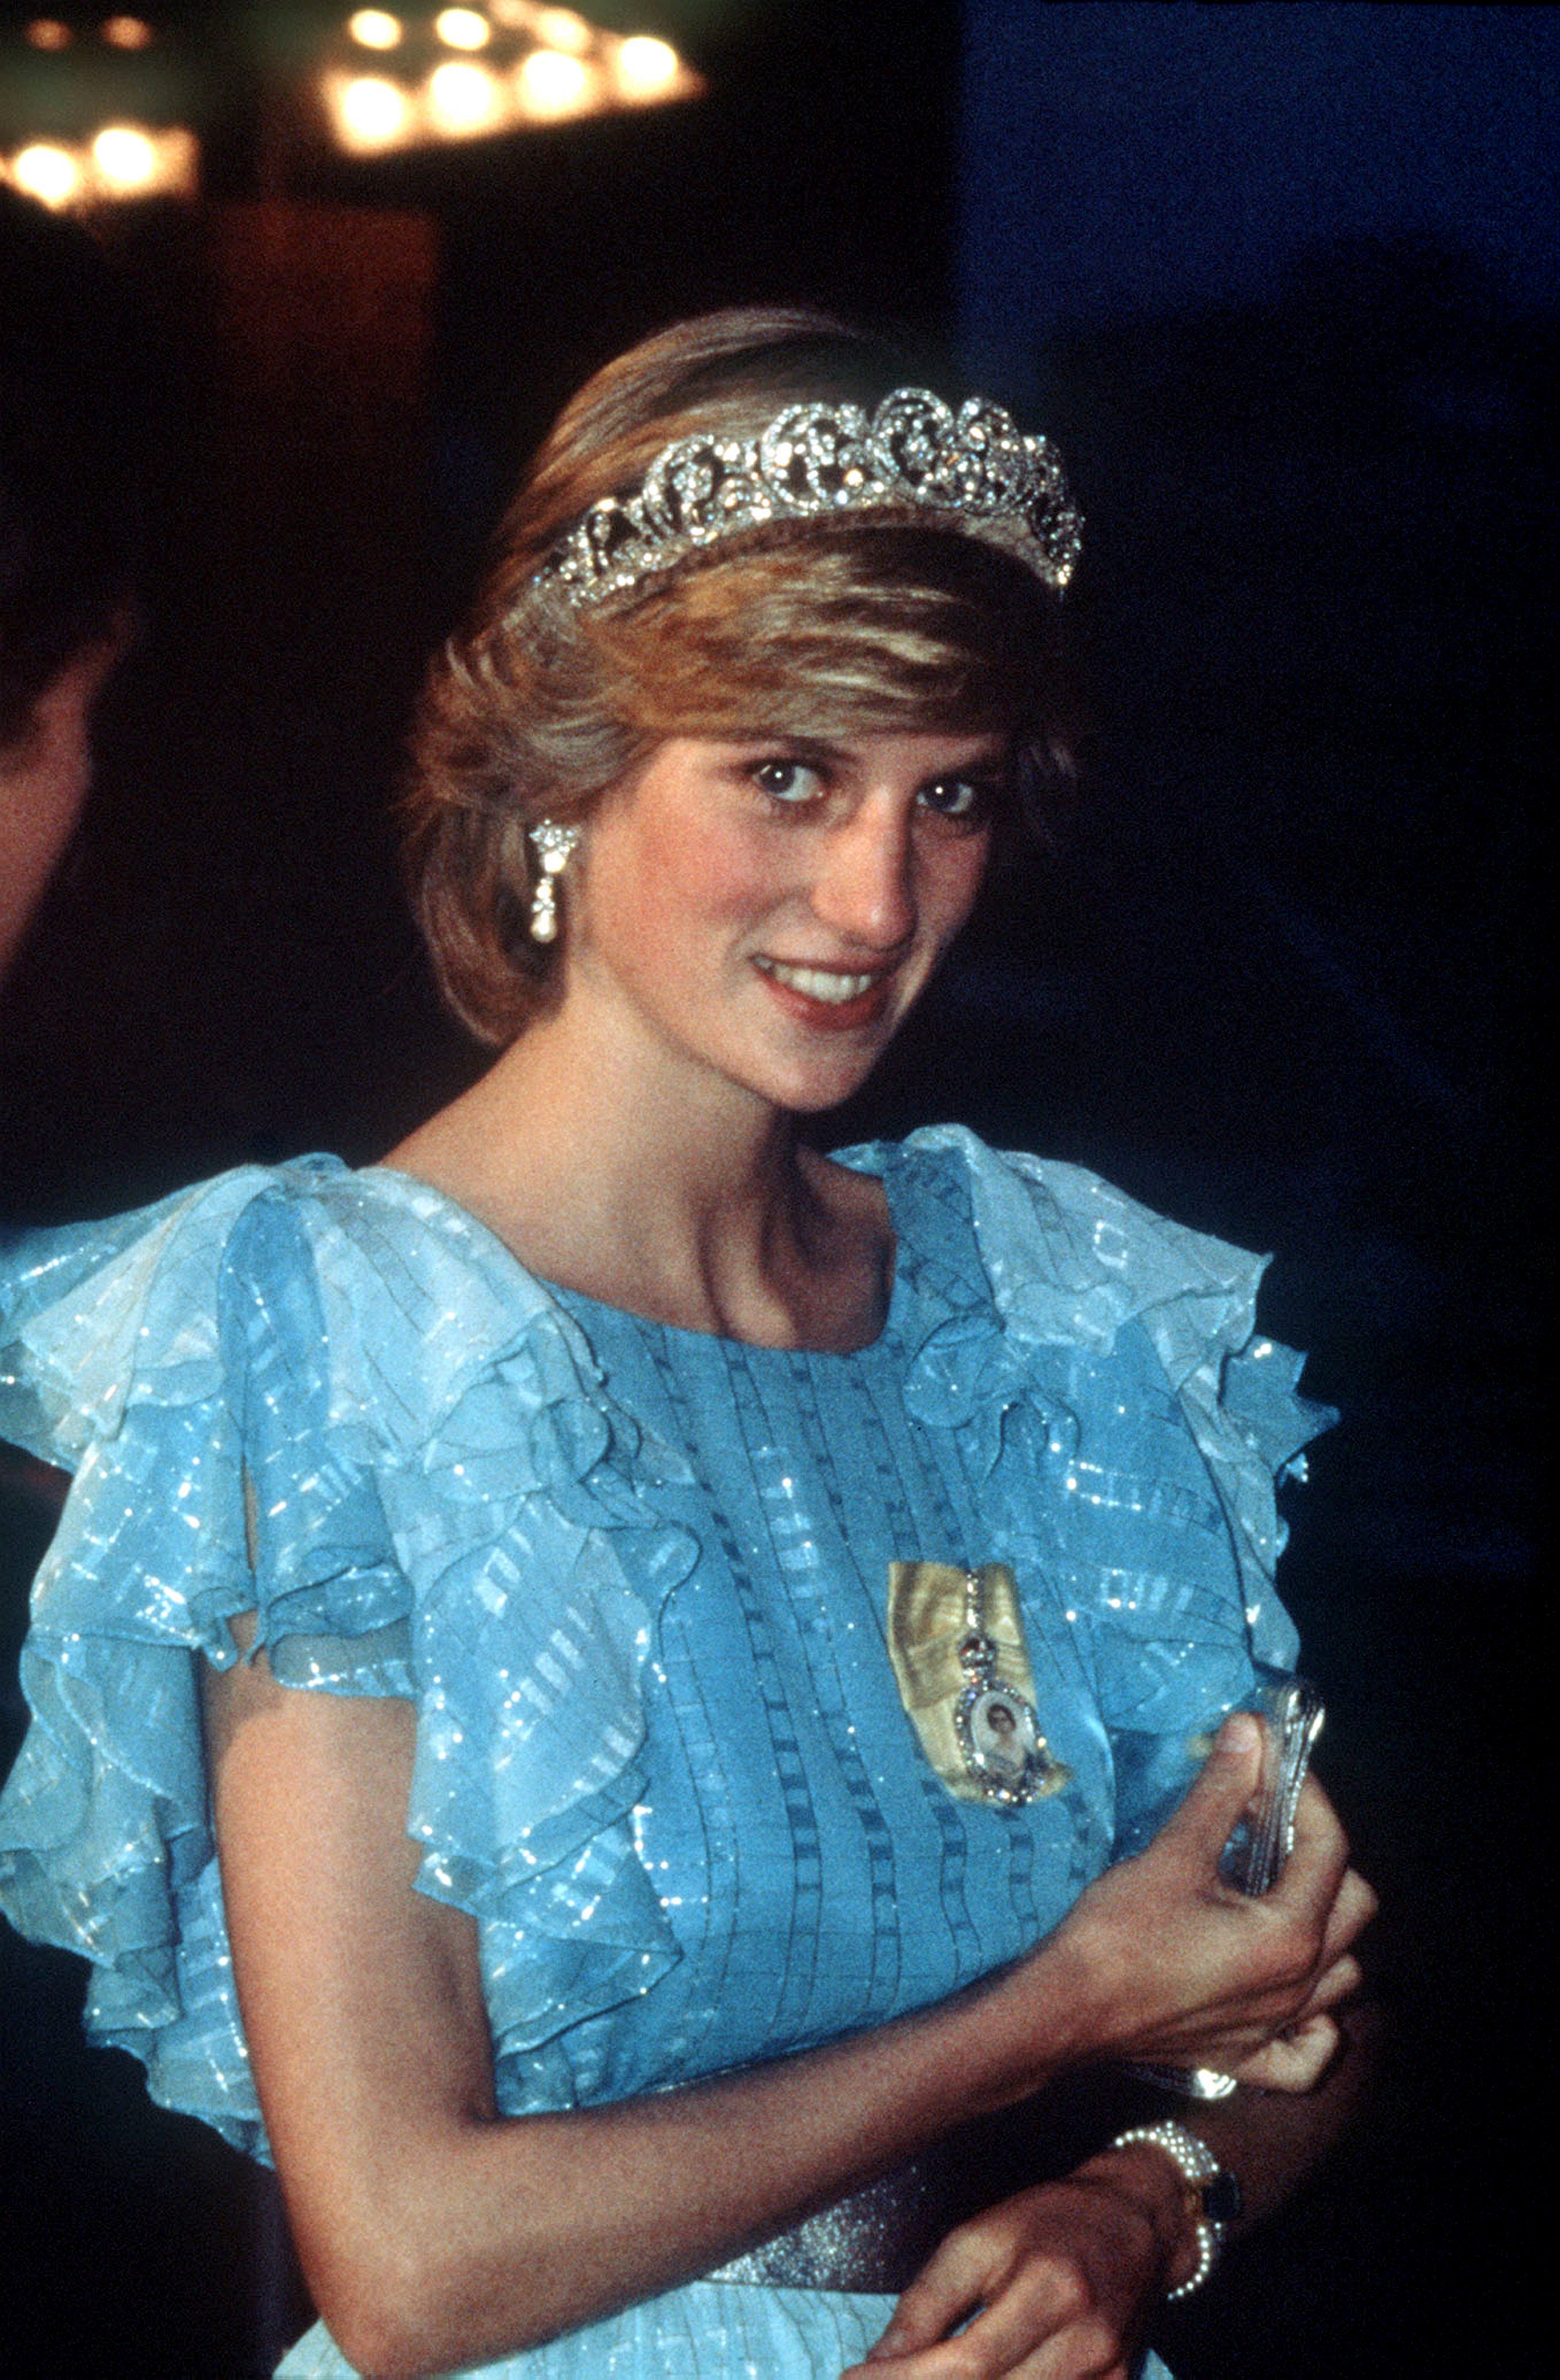 The Princess of Wales wears the Spencer family tiara at a state dinner in Saint John, New Brunswick, in 1983 (PA)